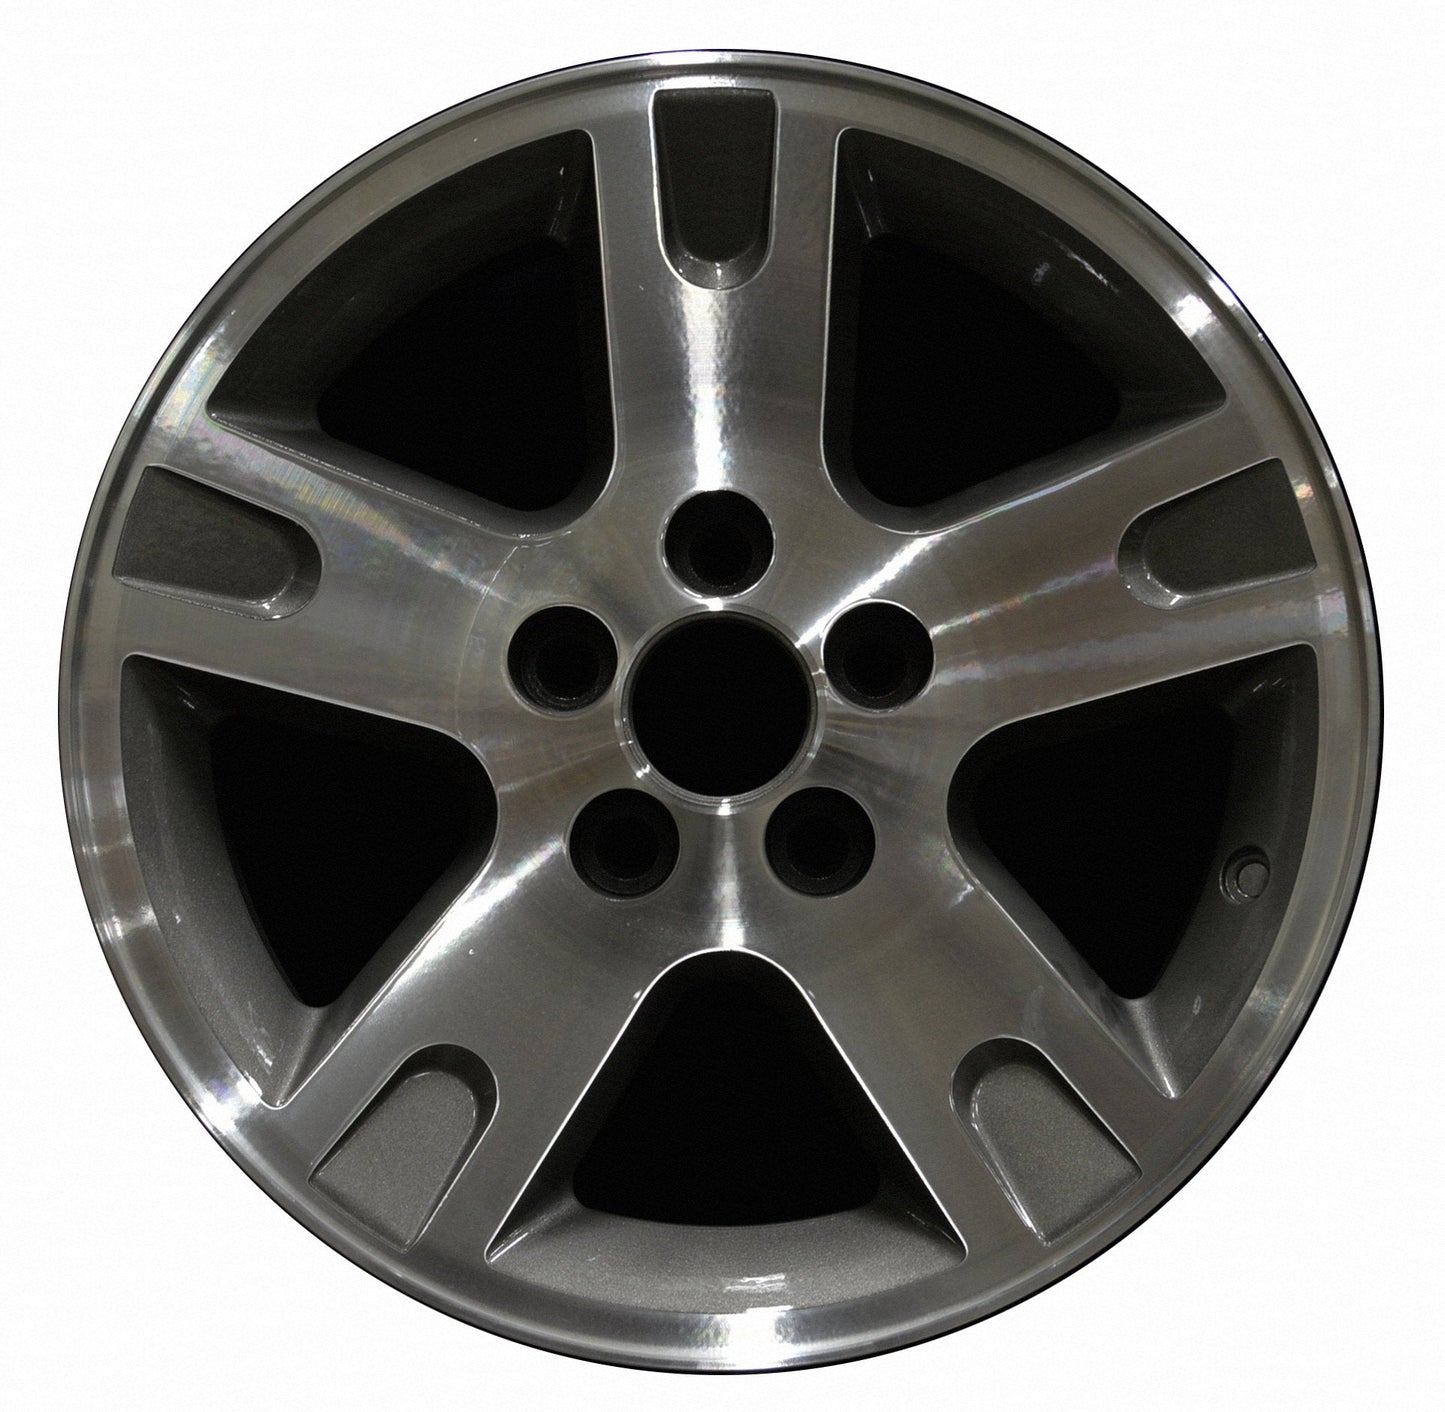 Ford Ranger  2002, 2003, 2004, 2005, 2006, 2007, 2008, 2009, 2010, 2011 Factory OEM Car Wheel Size 16x7 Alloy WAO.3463.PC03.MA